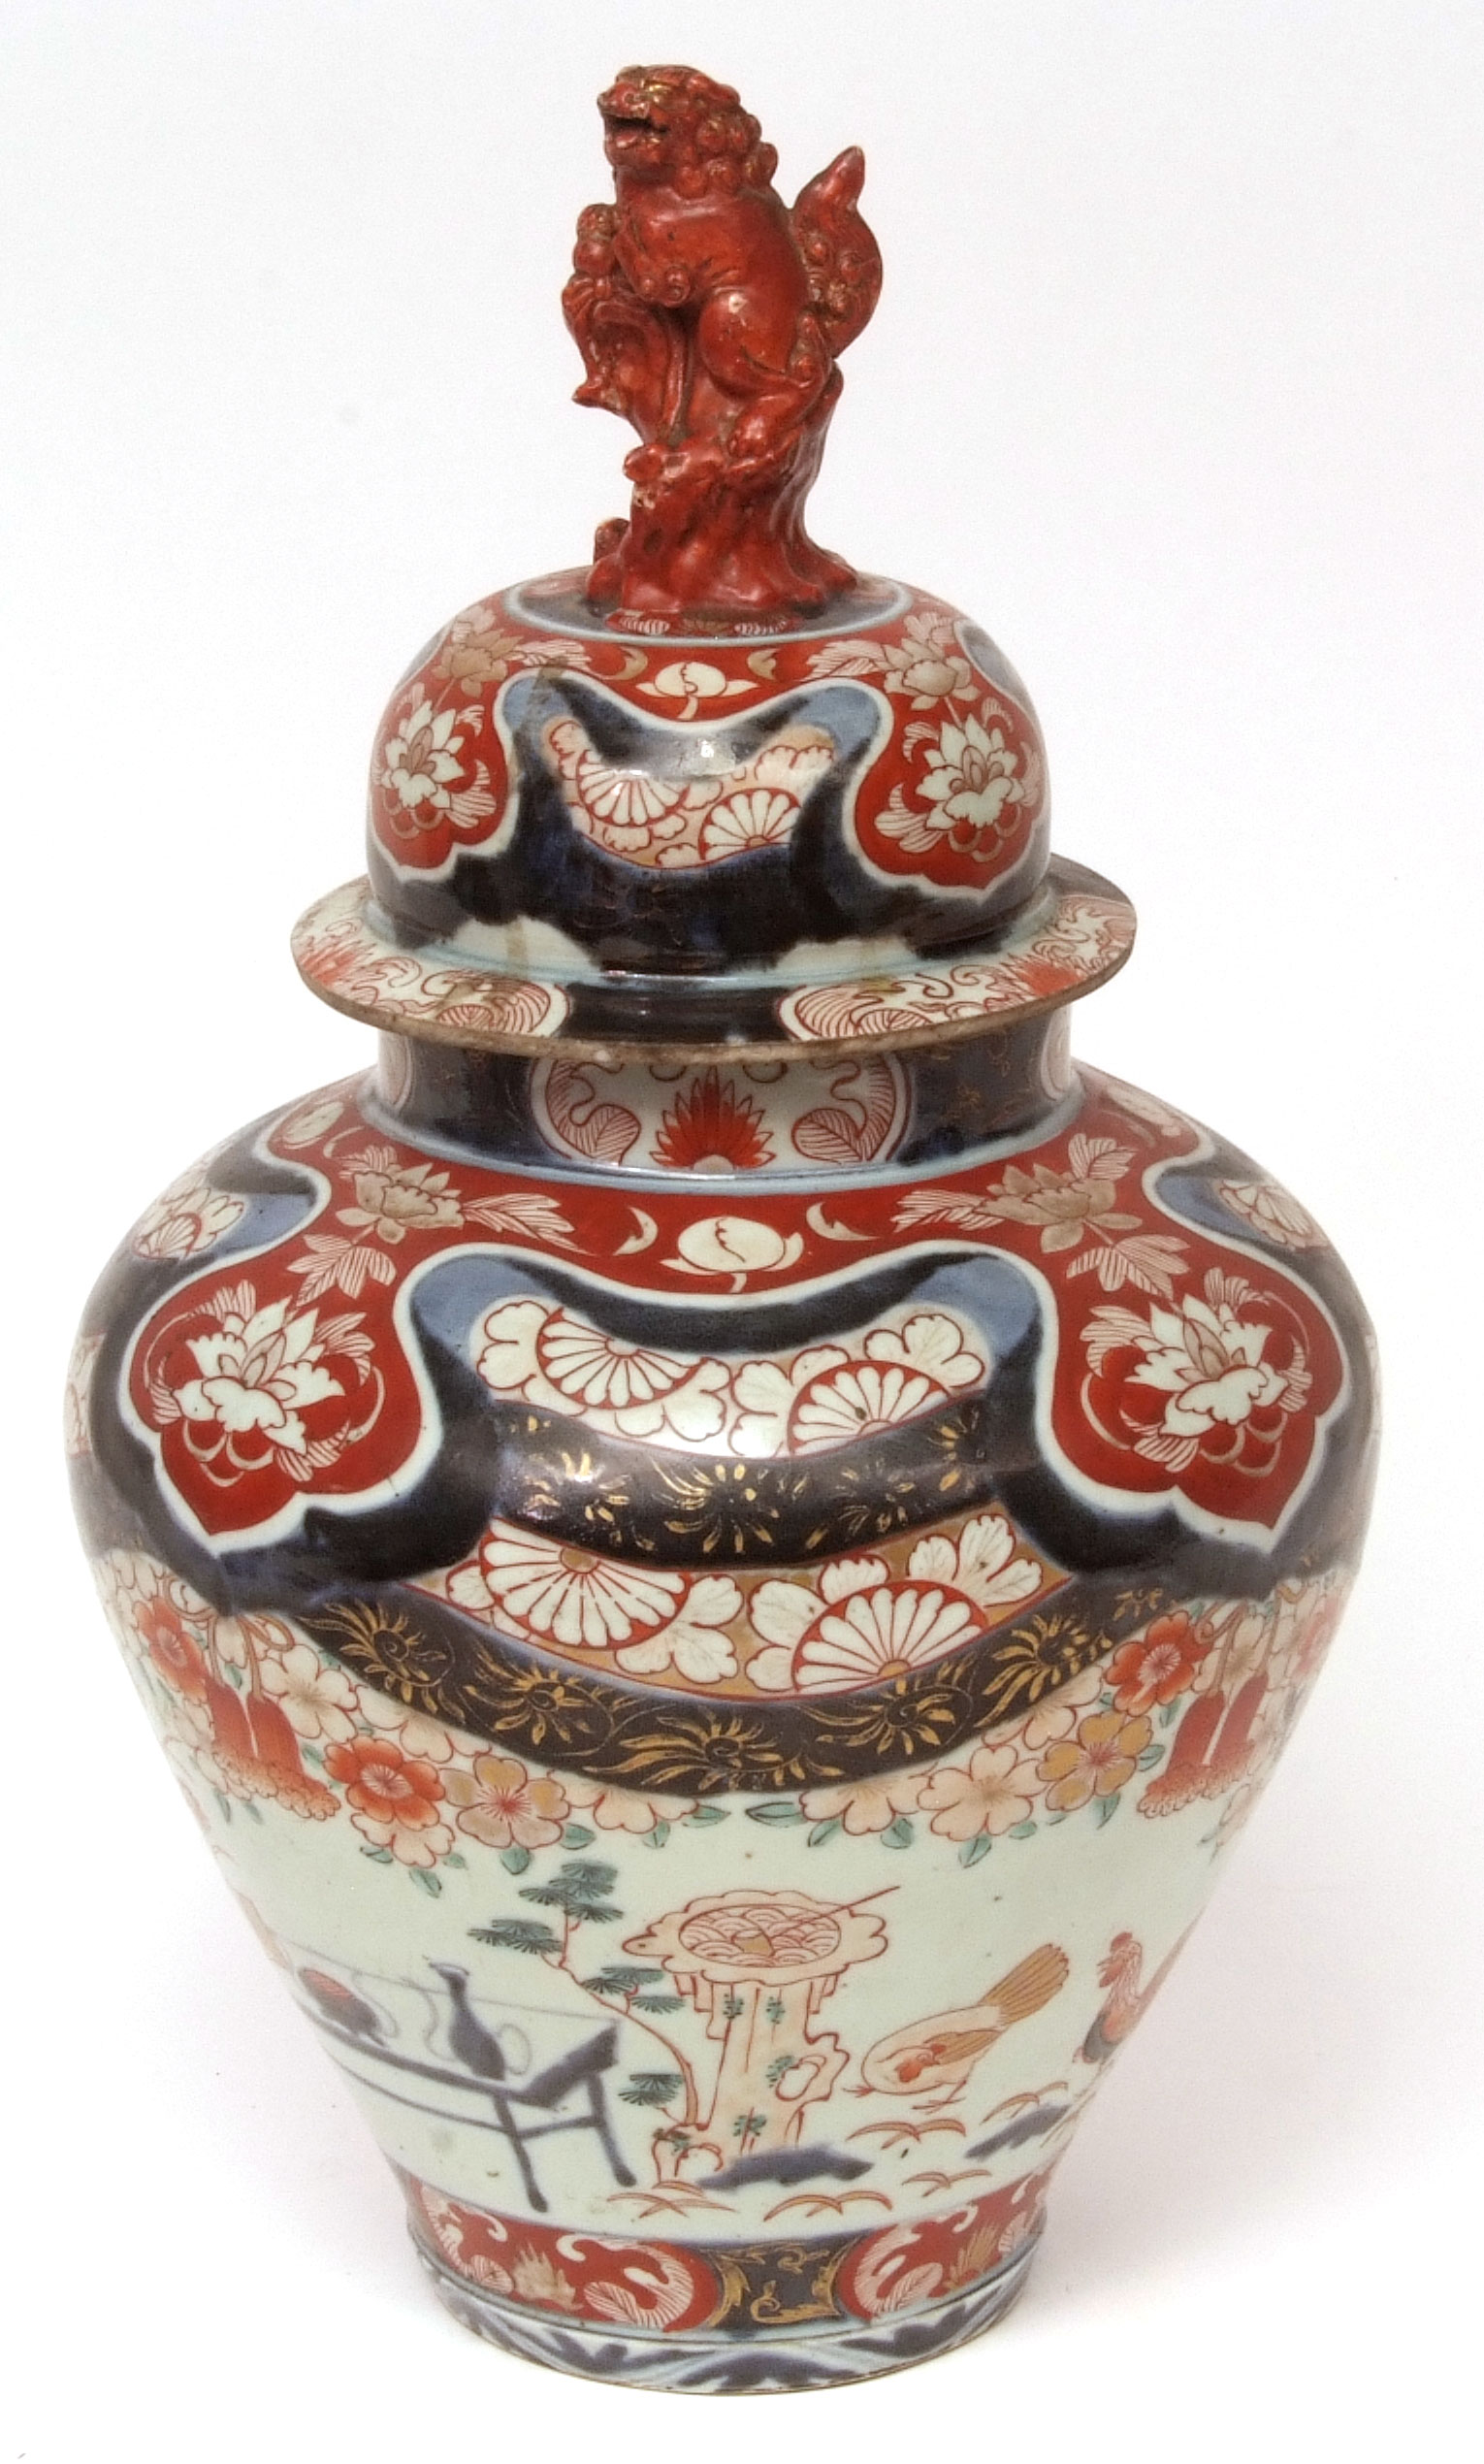 Late 17th/early 18th century Japanese Imari porcelain jar and cover with ShiShi finial decorated